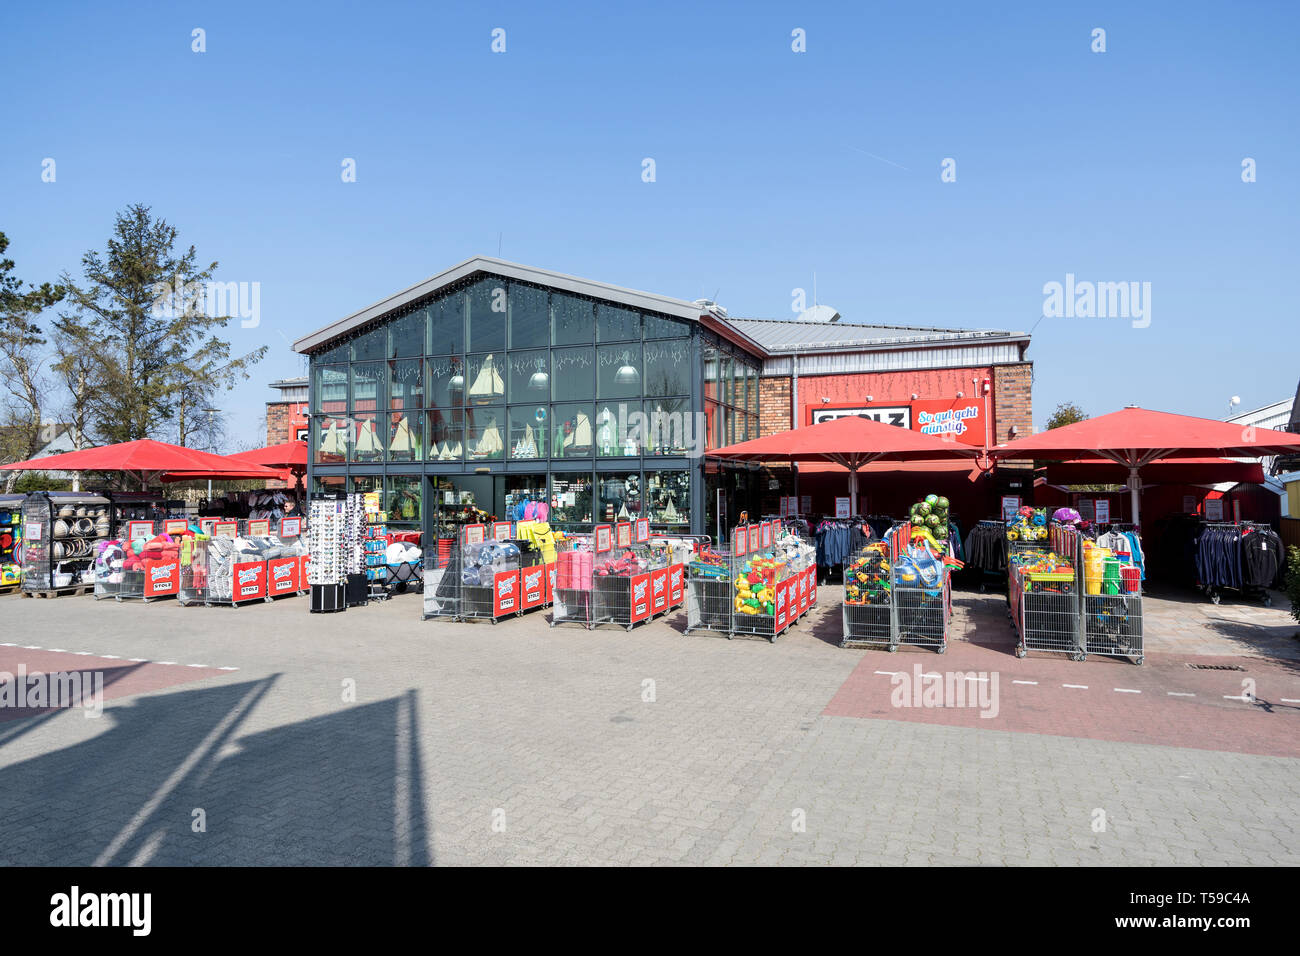 STOLZ department store in St. Peter-Ording, Germany. Founded in 1858 STOLZ operates today 32 department stores in northern Germany and an online-shop. Stock Photo